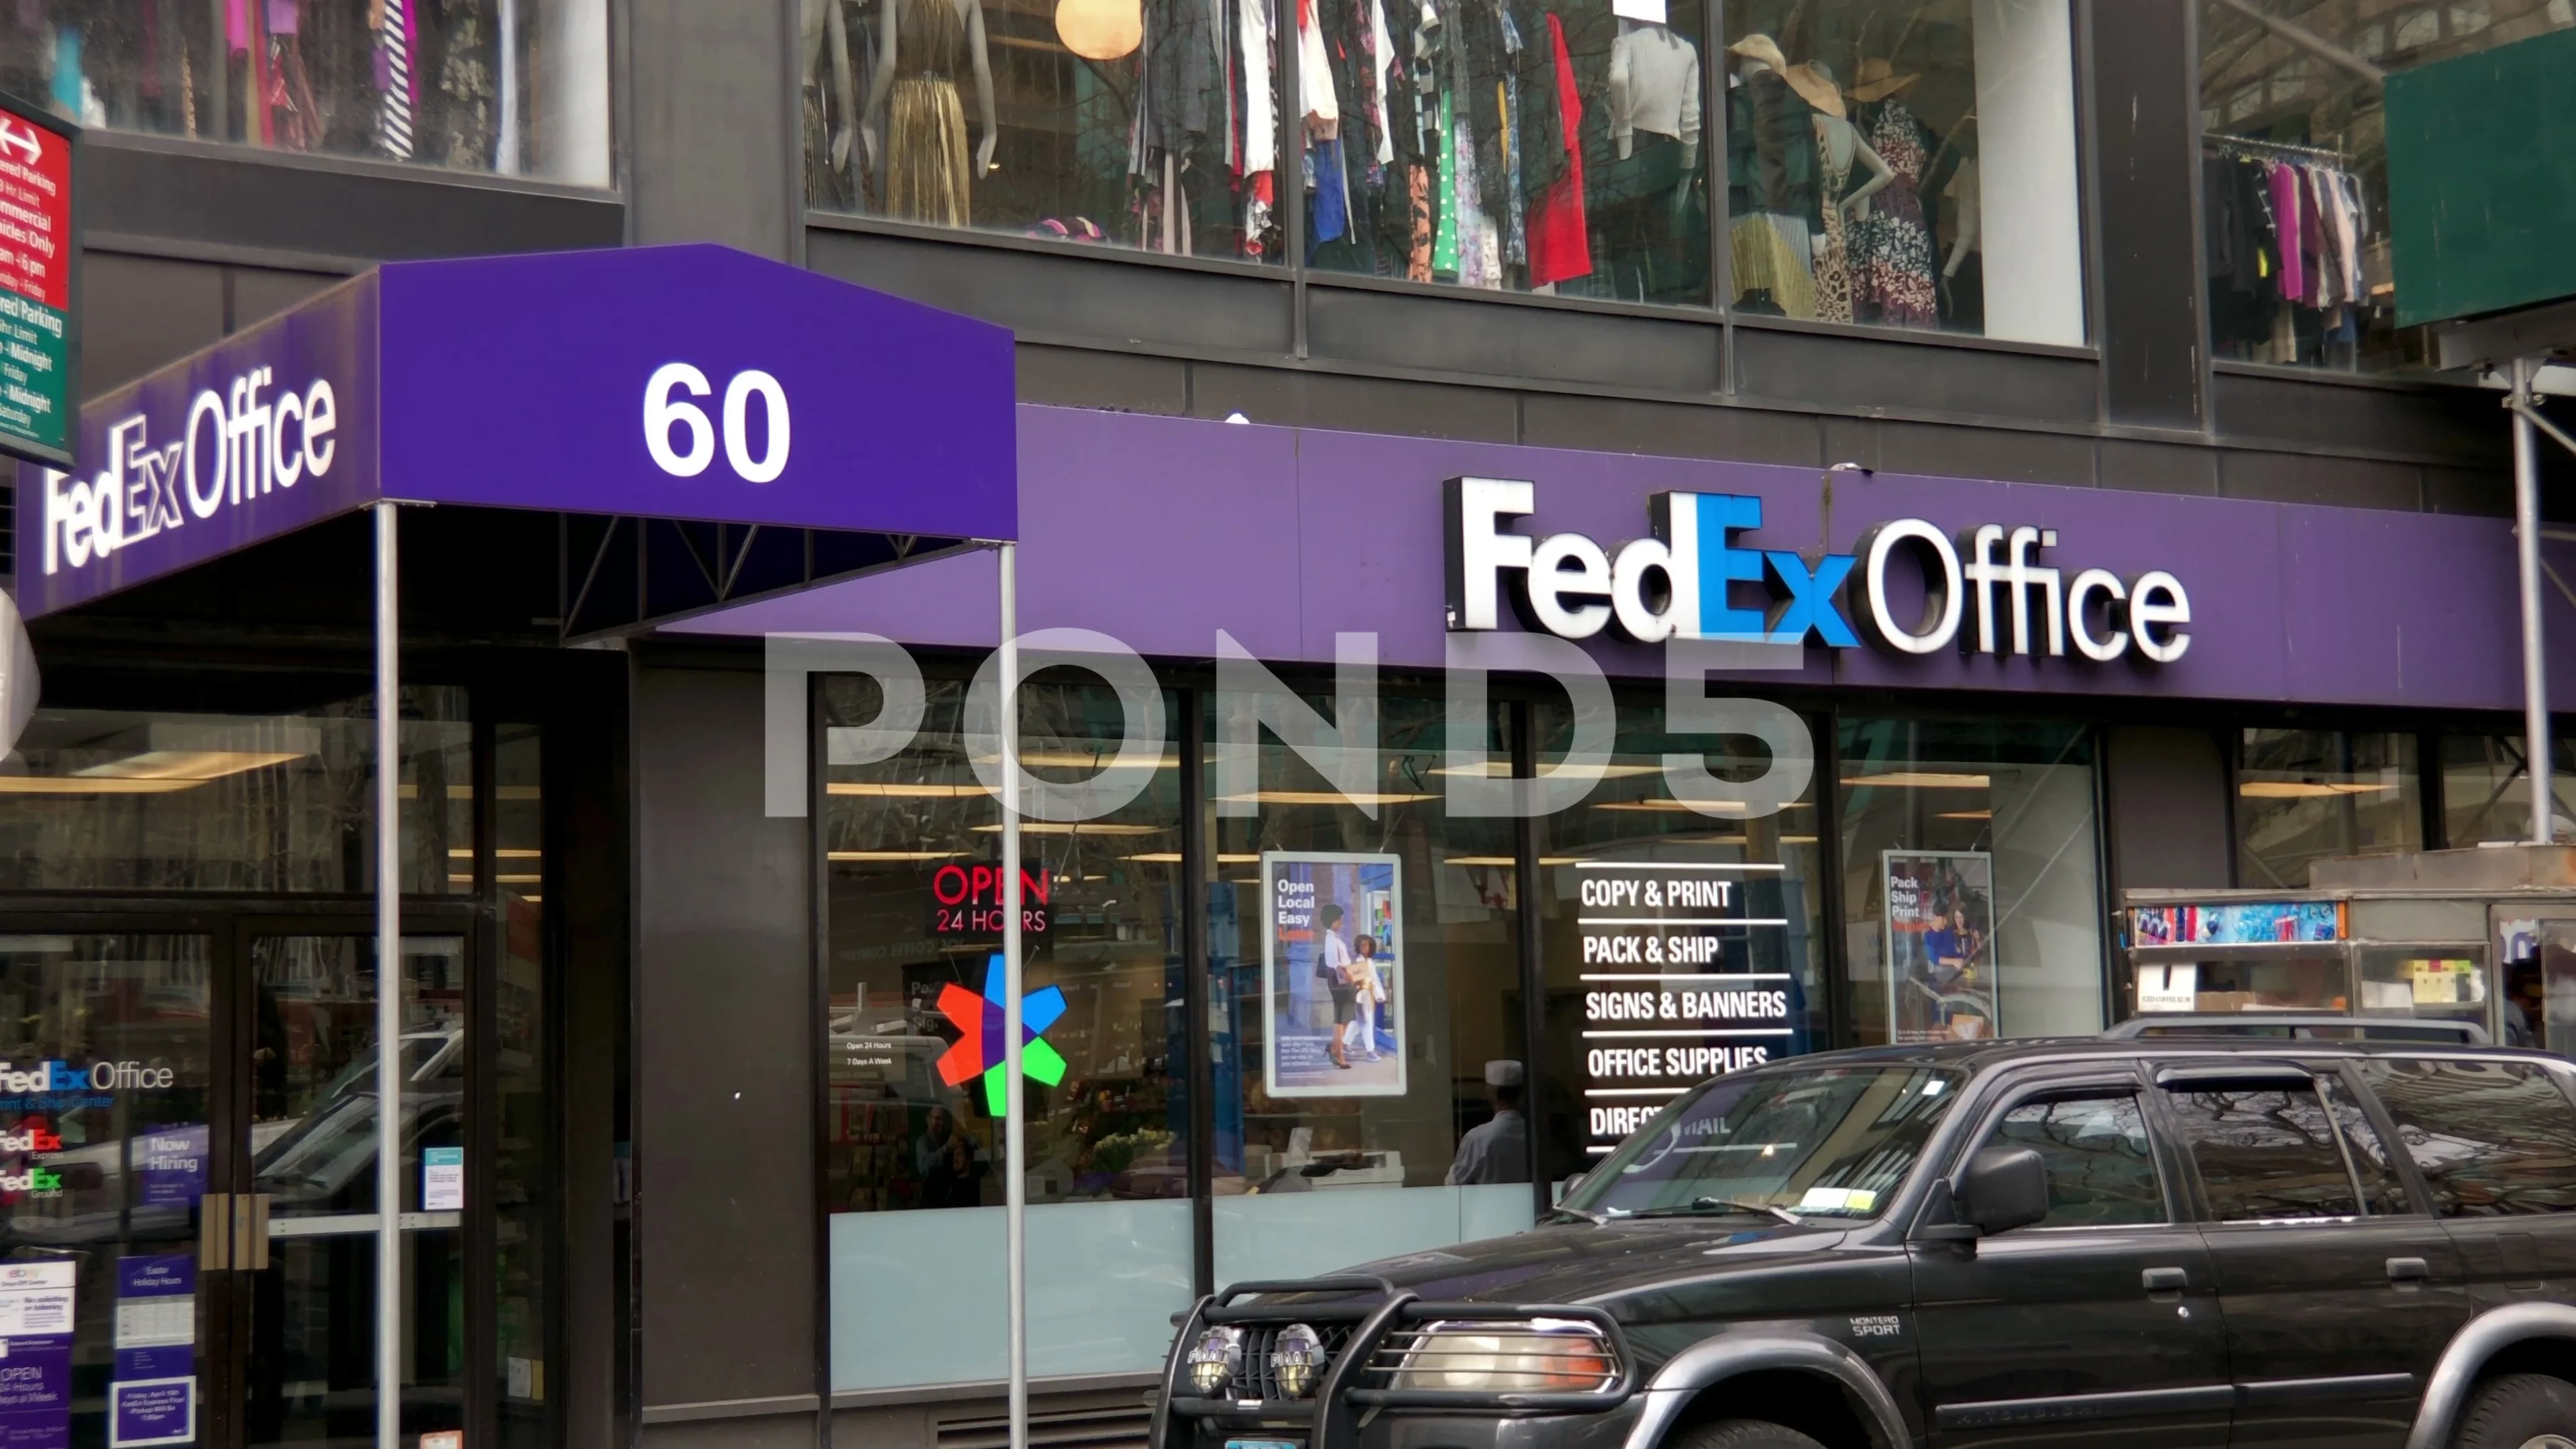 FEDEX Office exteriors in NYC (3 Shots) | Stock Video | Pond5